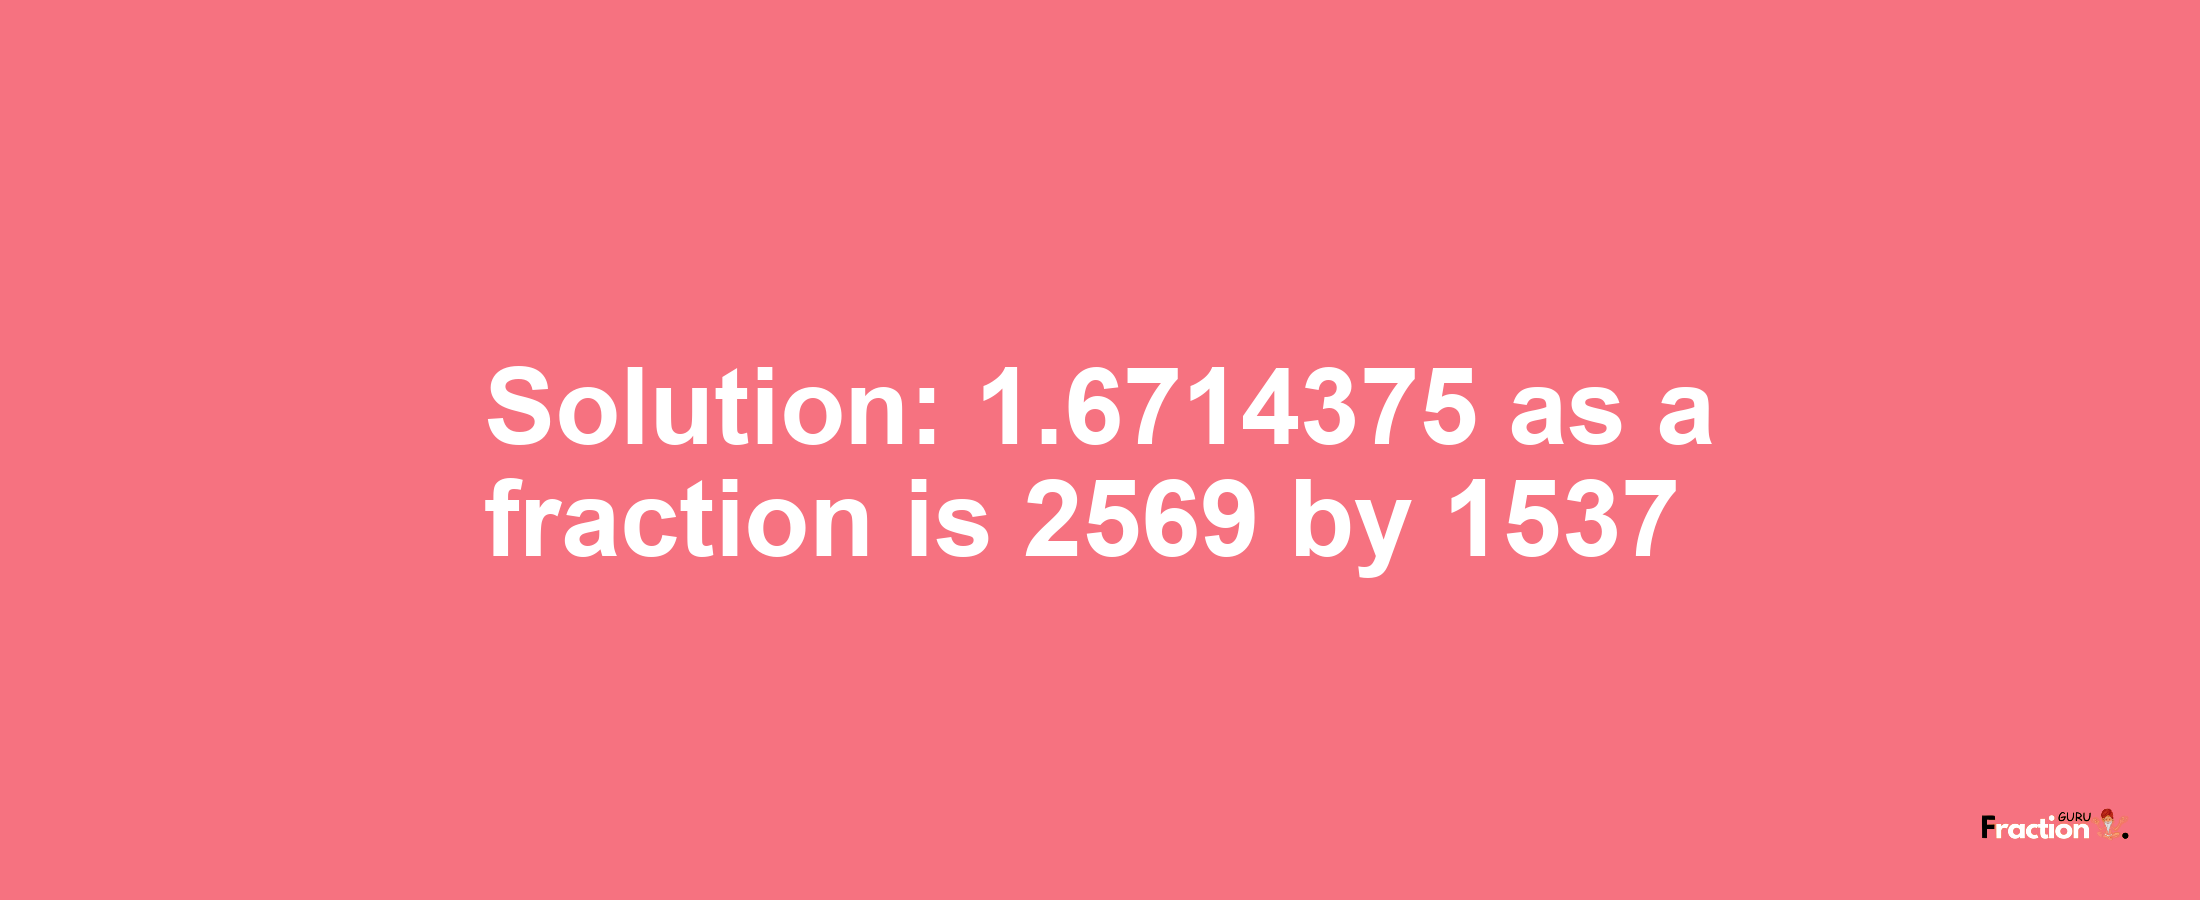 Solution:1.6714375 as a fraction is 2569/1537